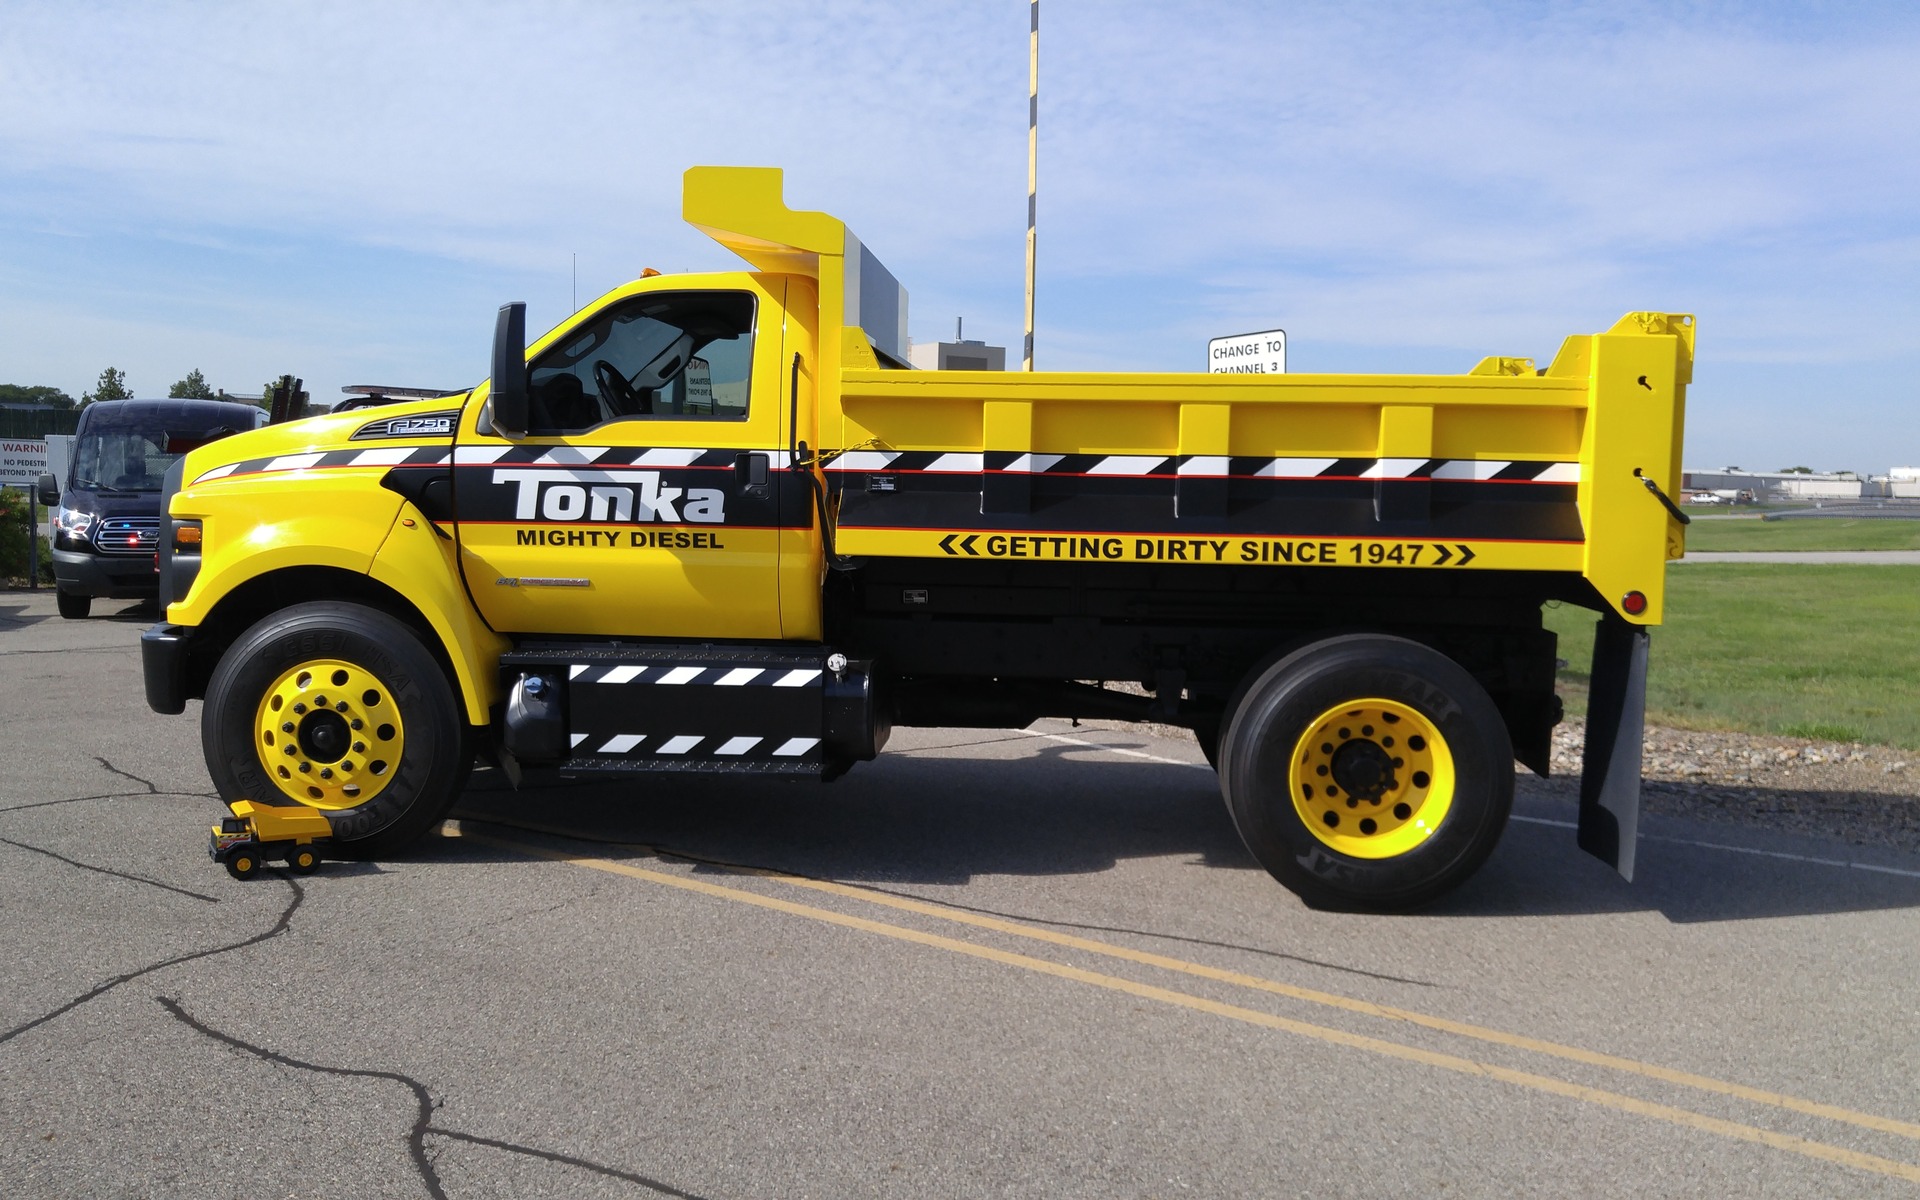 Visit to Ford’s Headquarters, from the Model A to a Tonka Truck - The